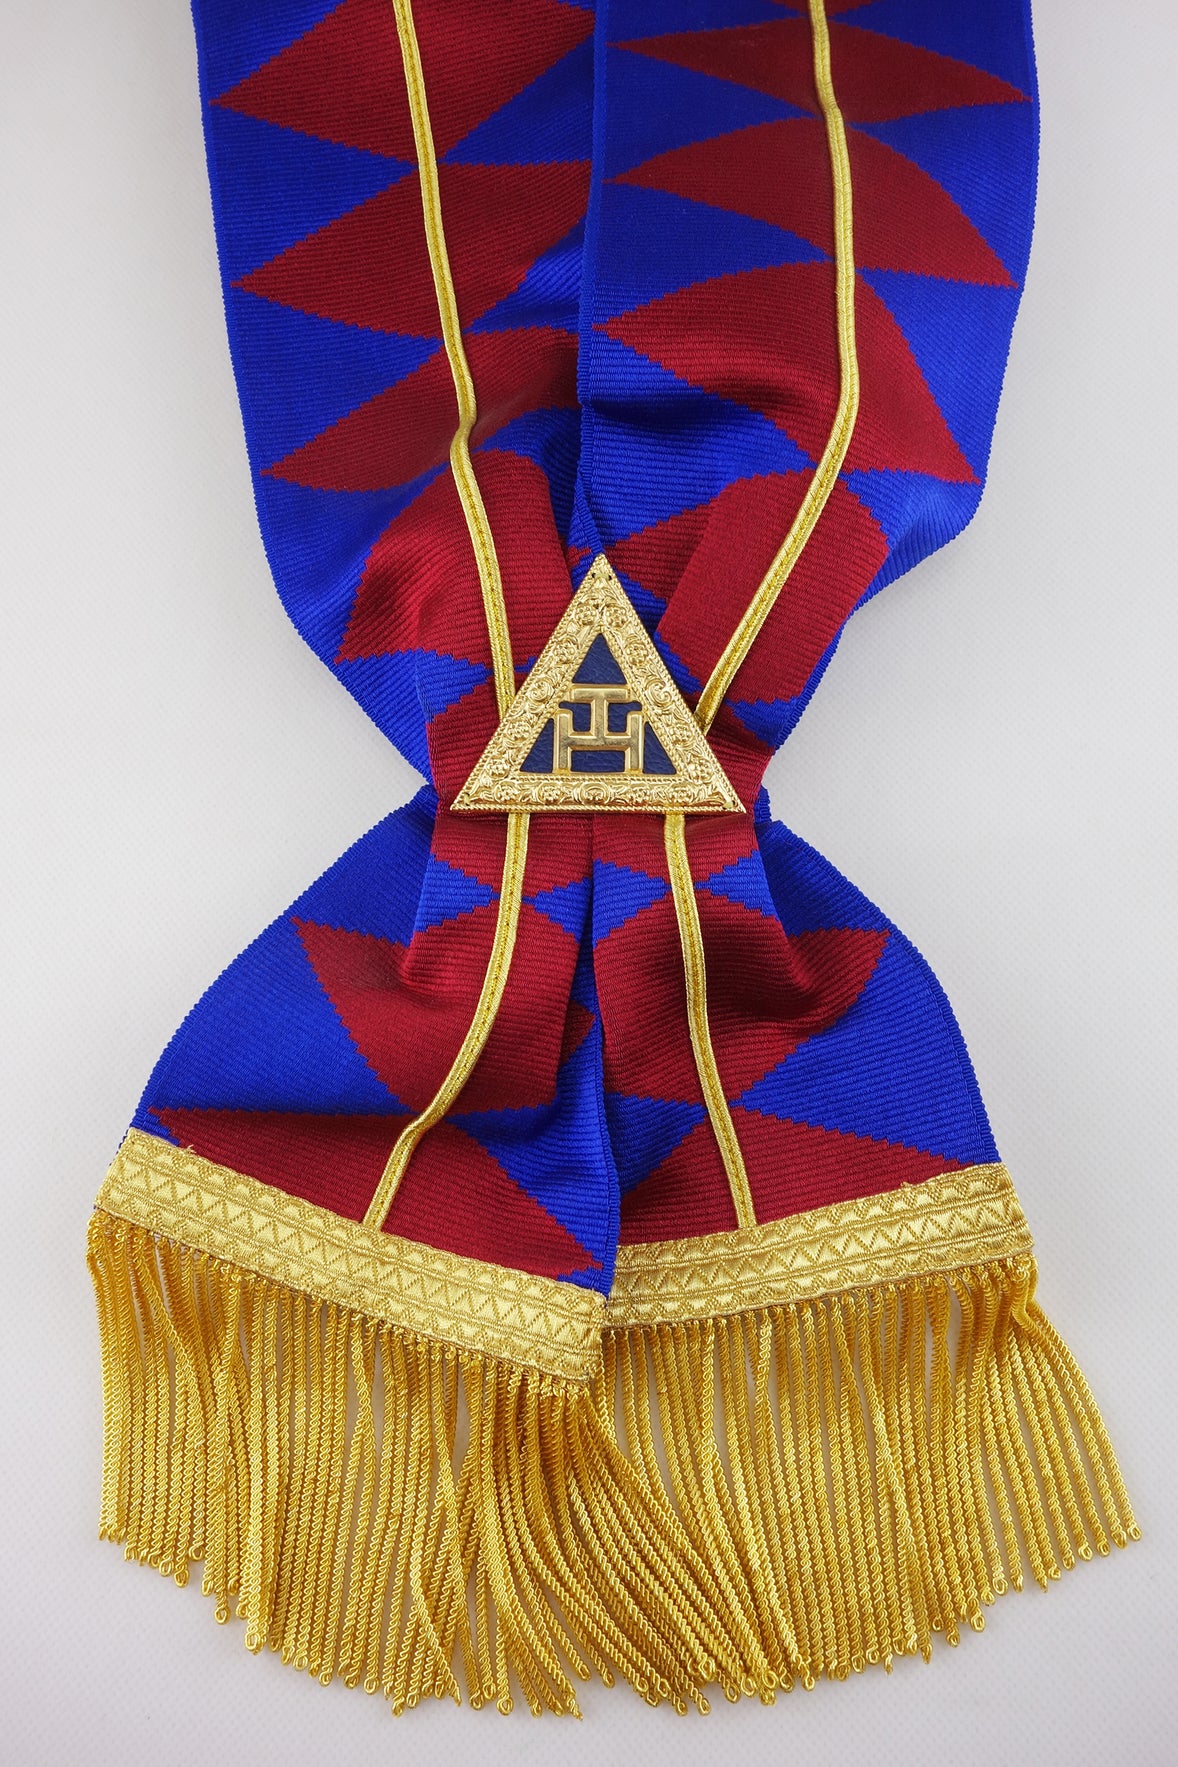 Grand Chapter Officer Sash, Victoria